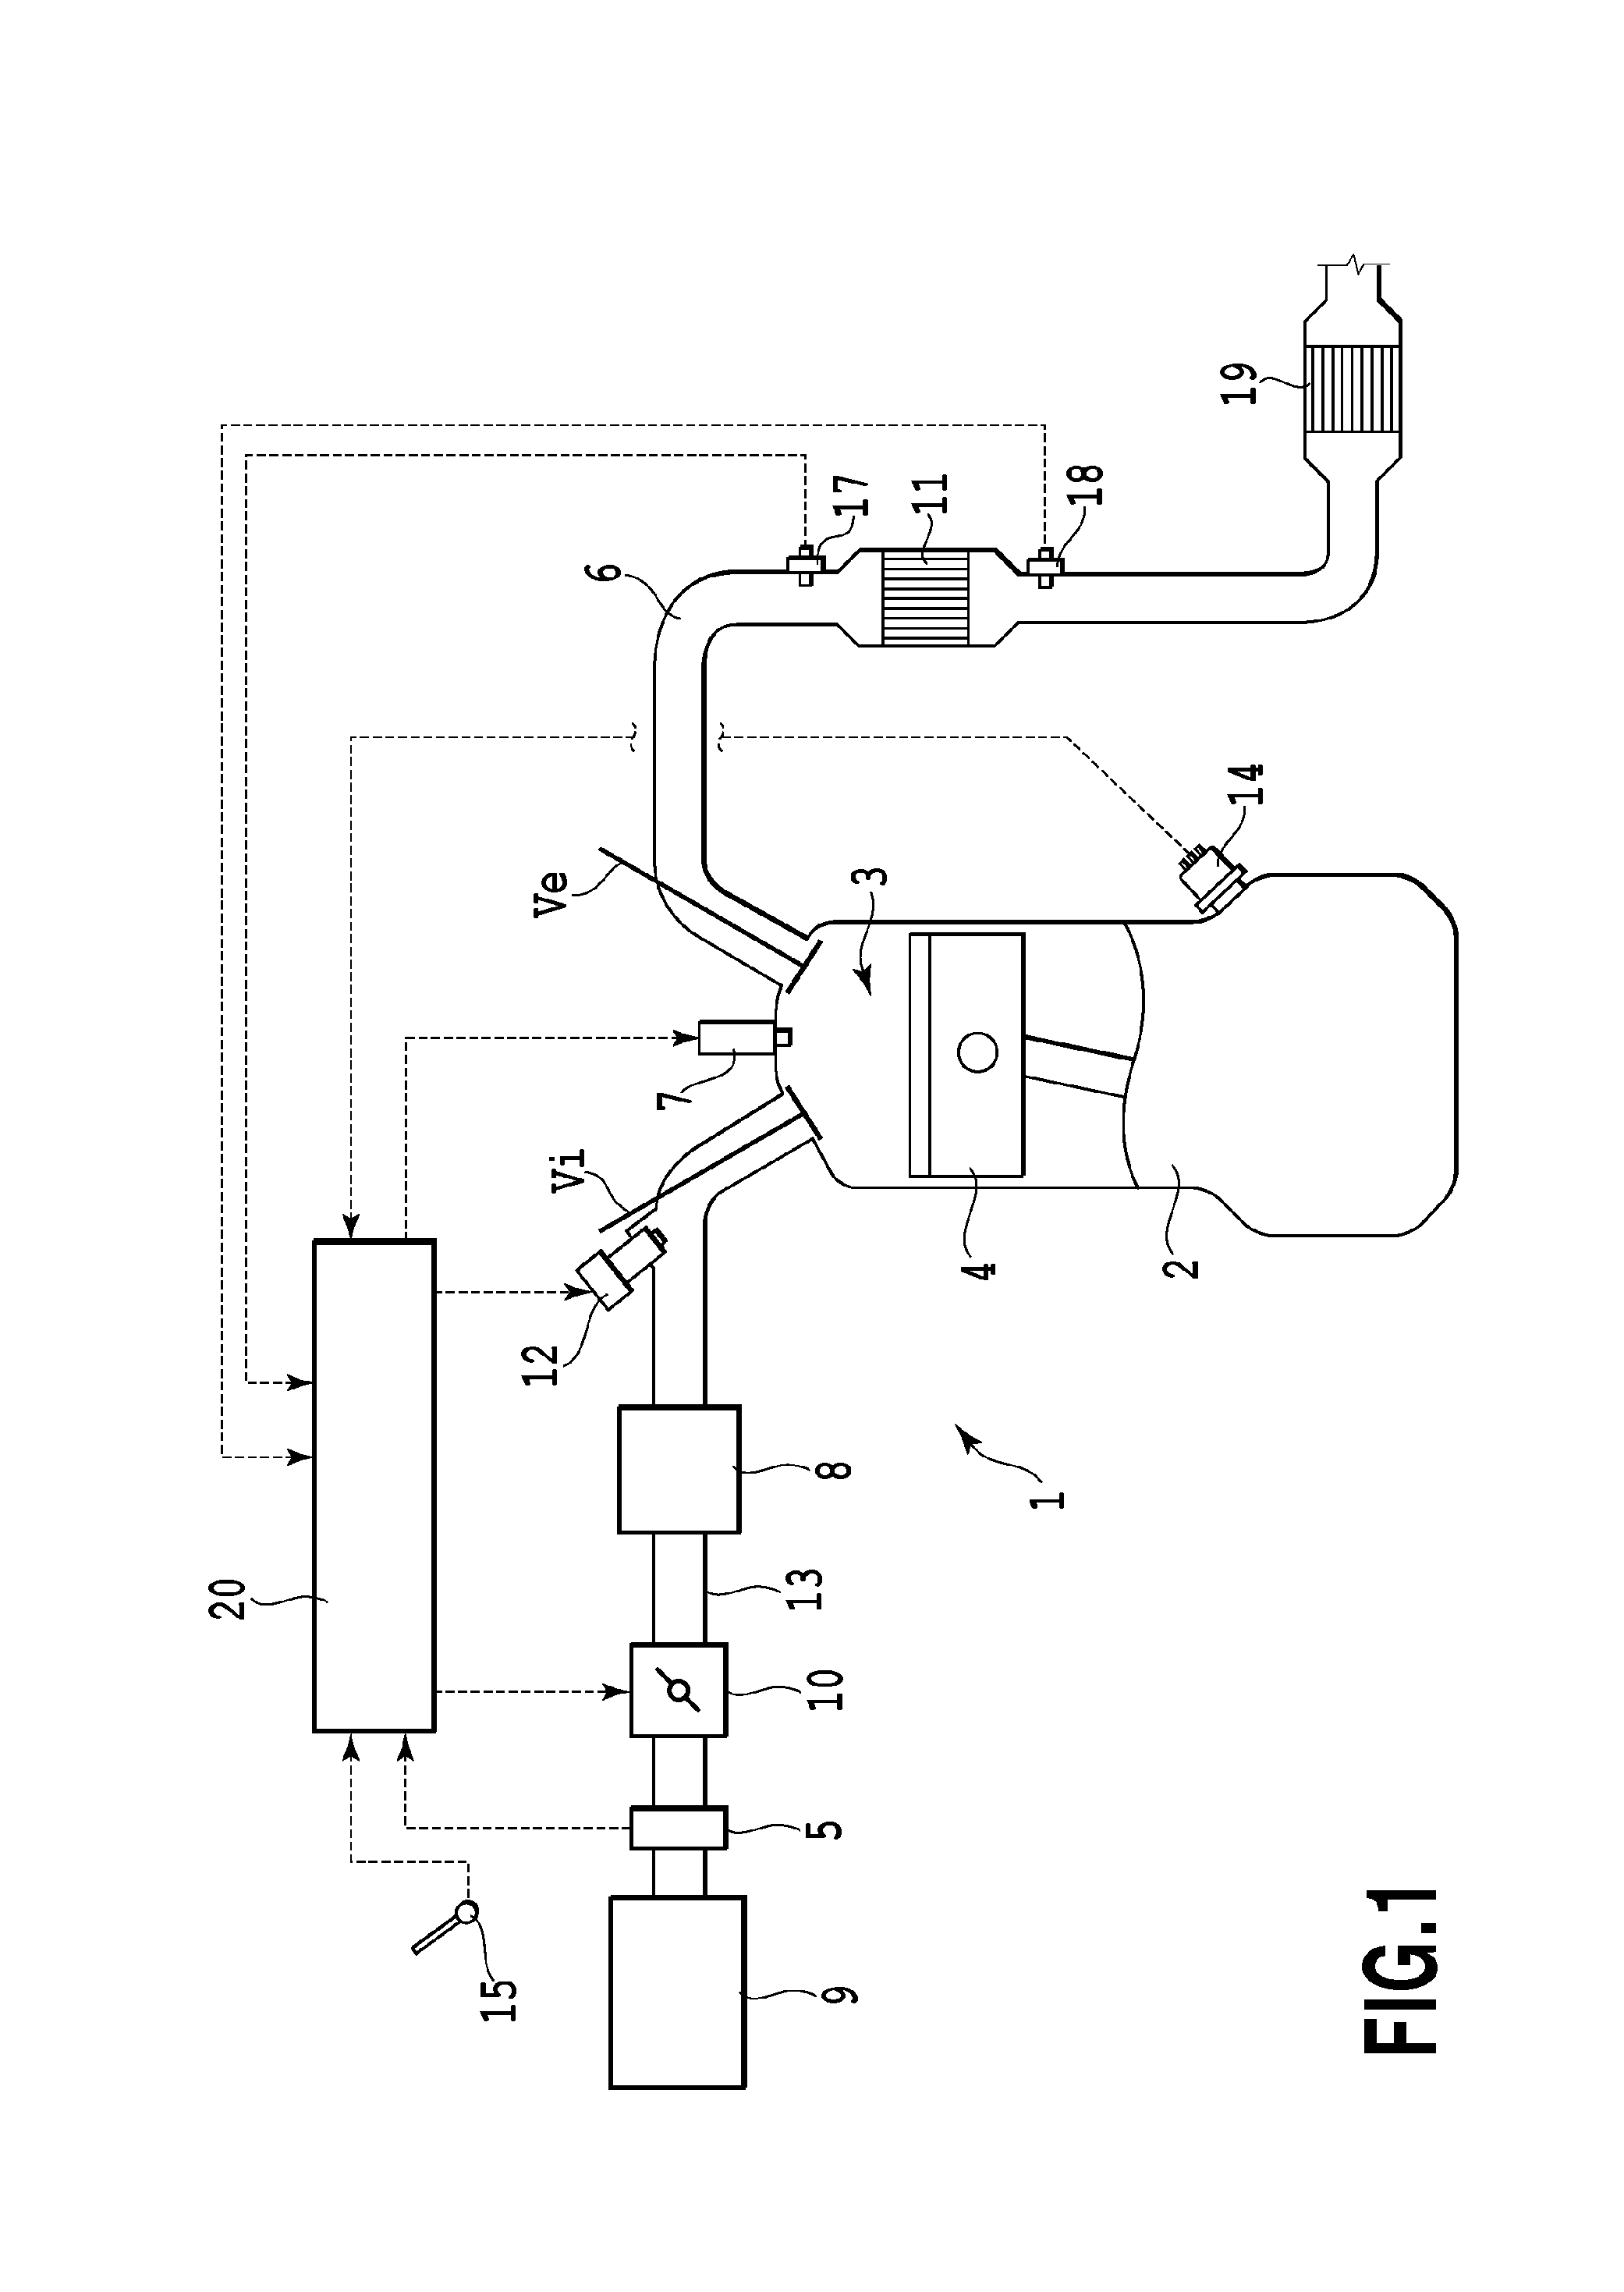 Catalyst abnormality diagnosis apparatus